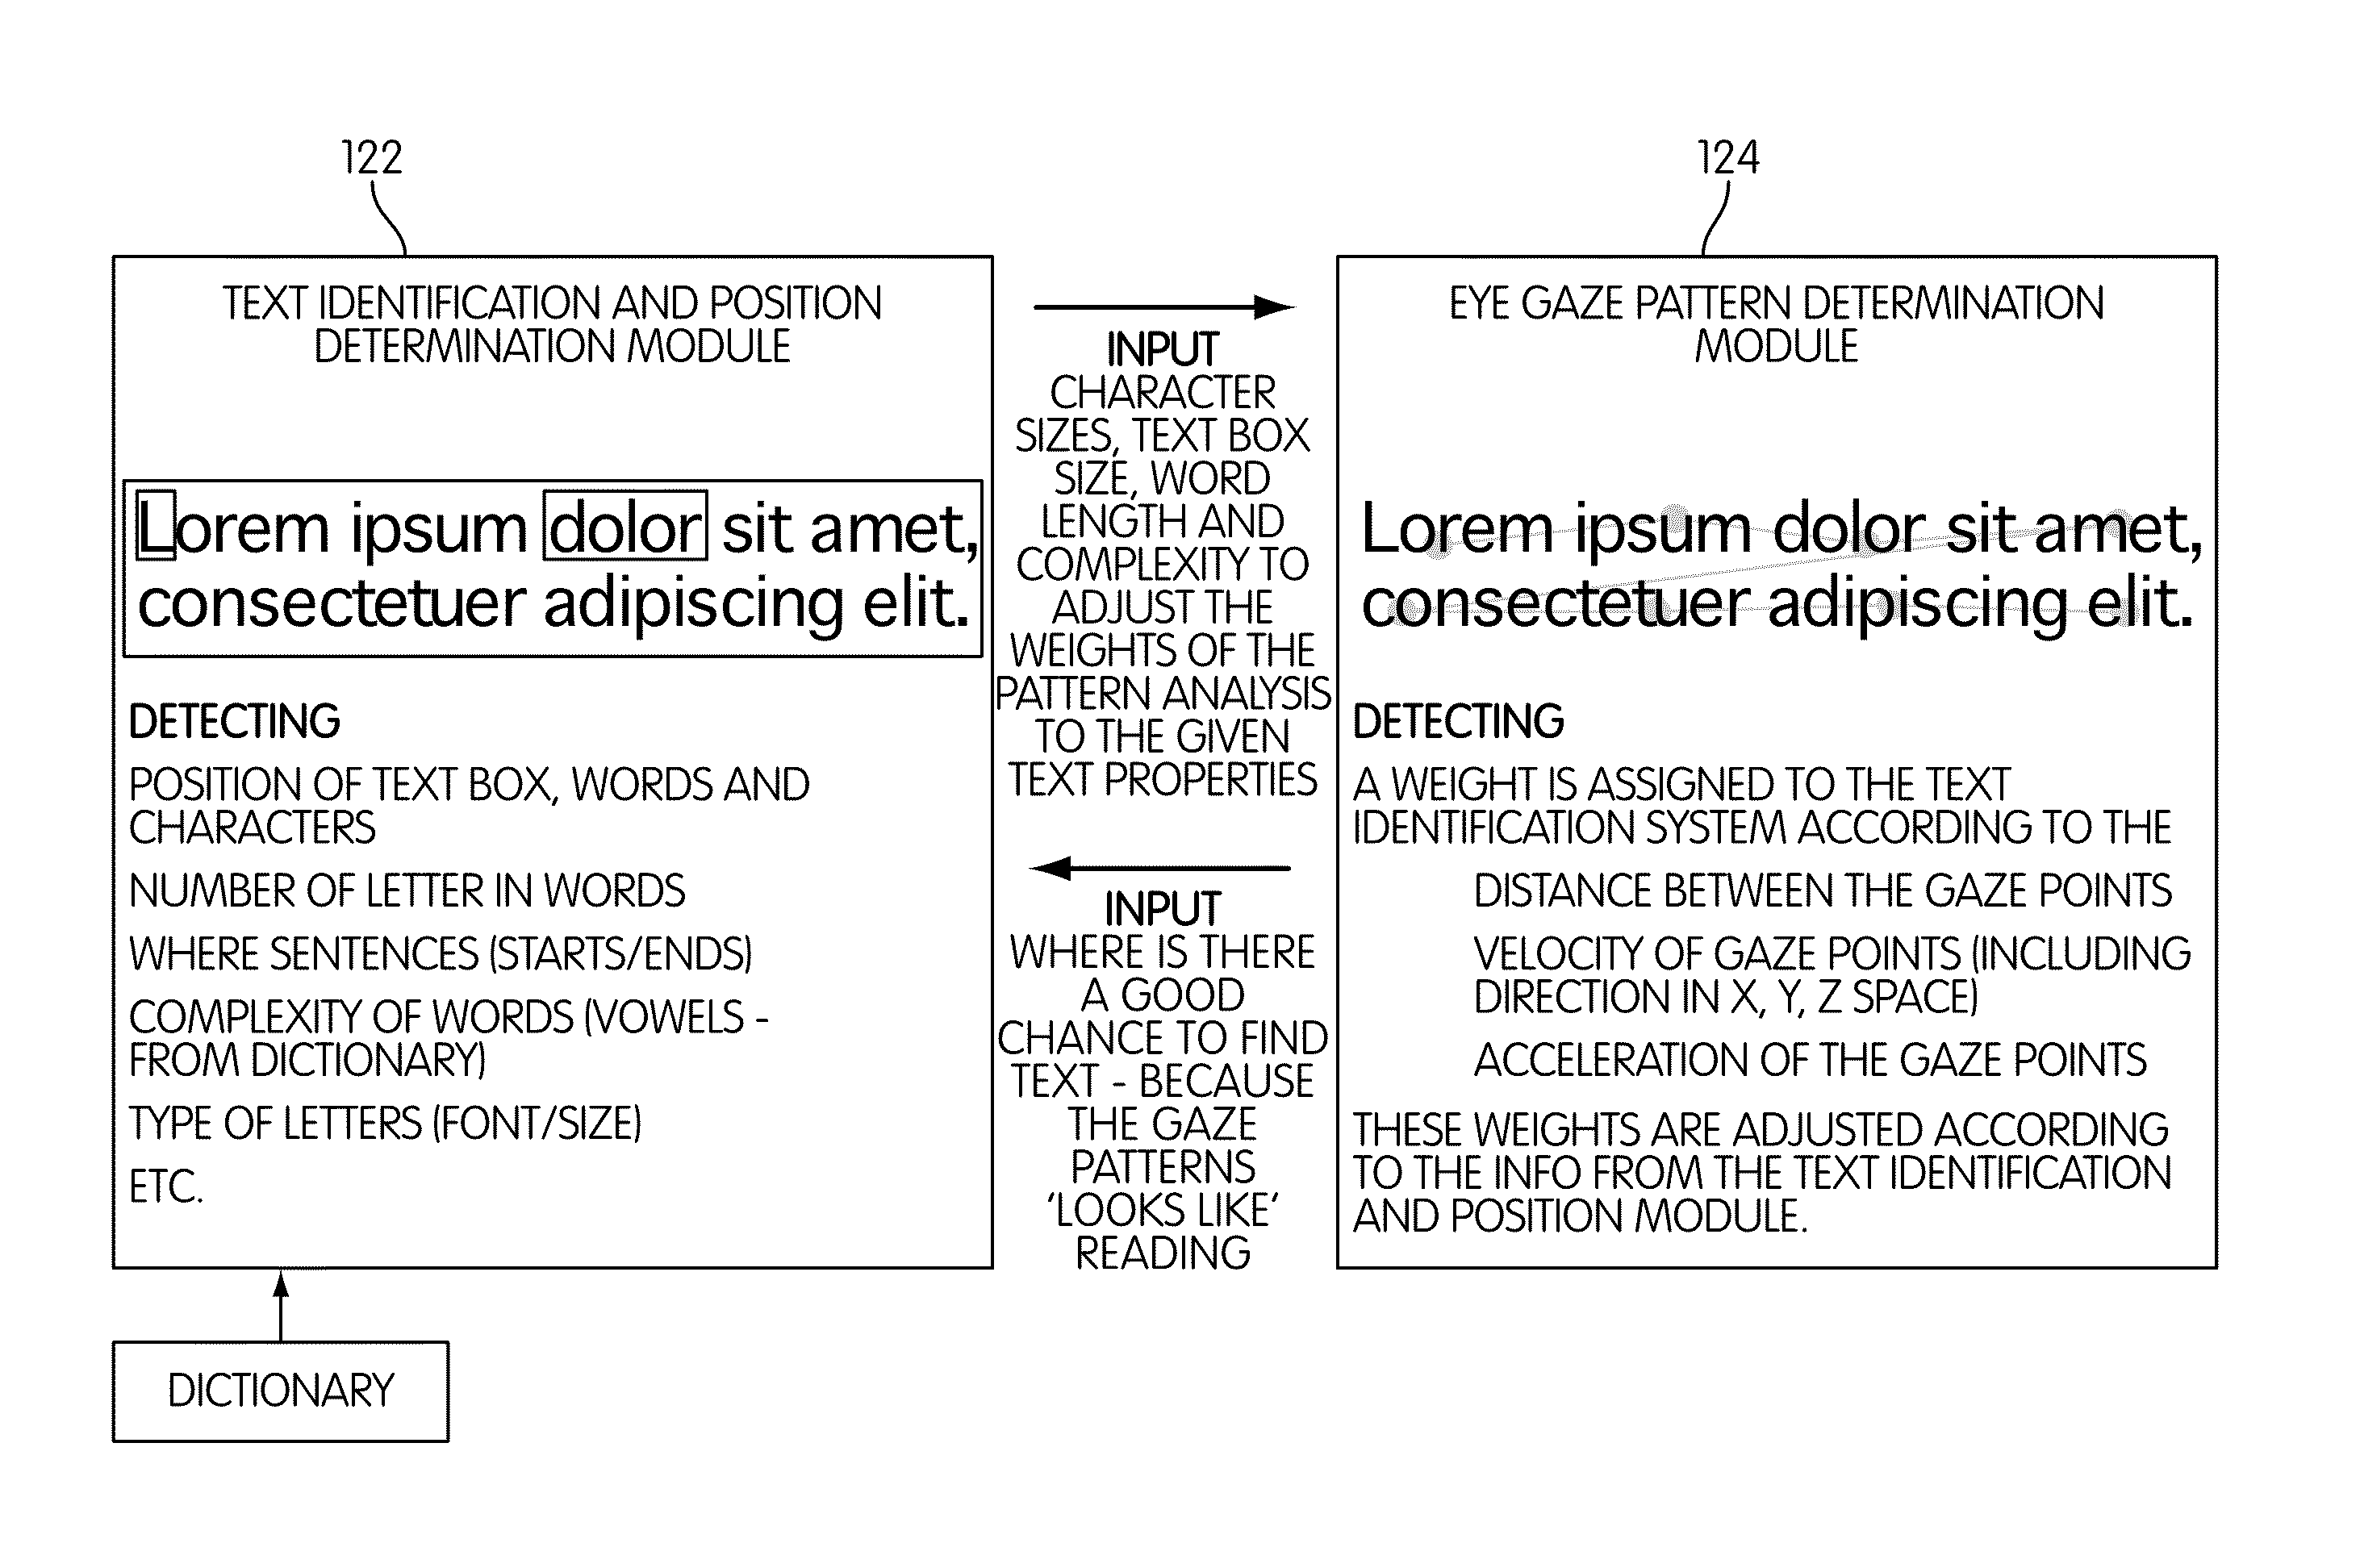 System and method for identifying the existence and position of text in visual media content and for determining a subjects interactions with the text